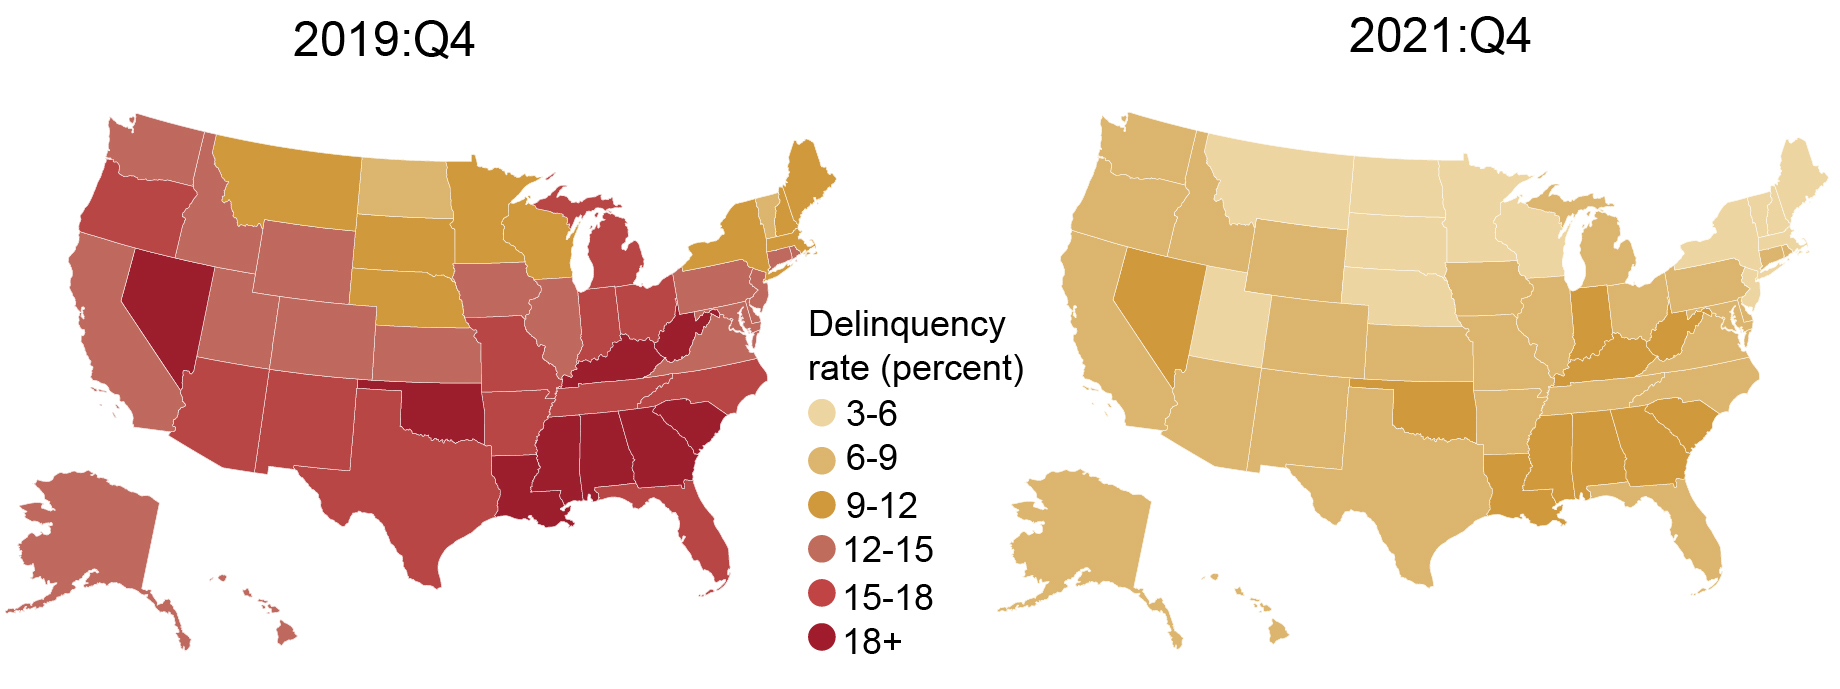 Two maps illustrating the borrower delinquency rate for each state for the end of 2019 and the end of 2021.  Scale is gold at 3-6% to red at 18%.

